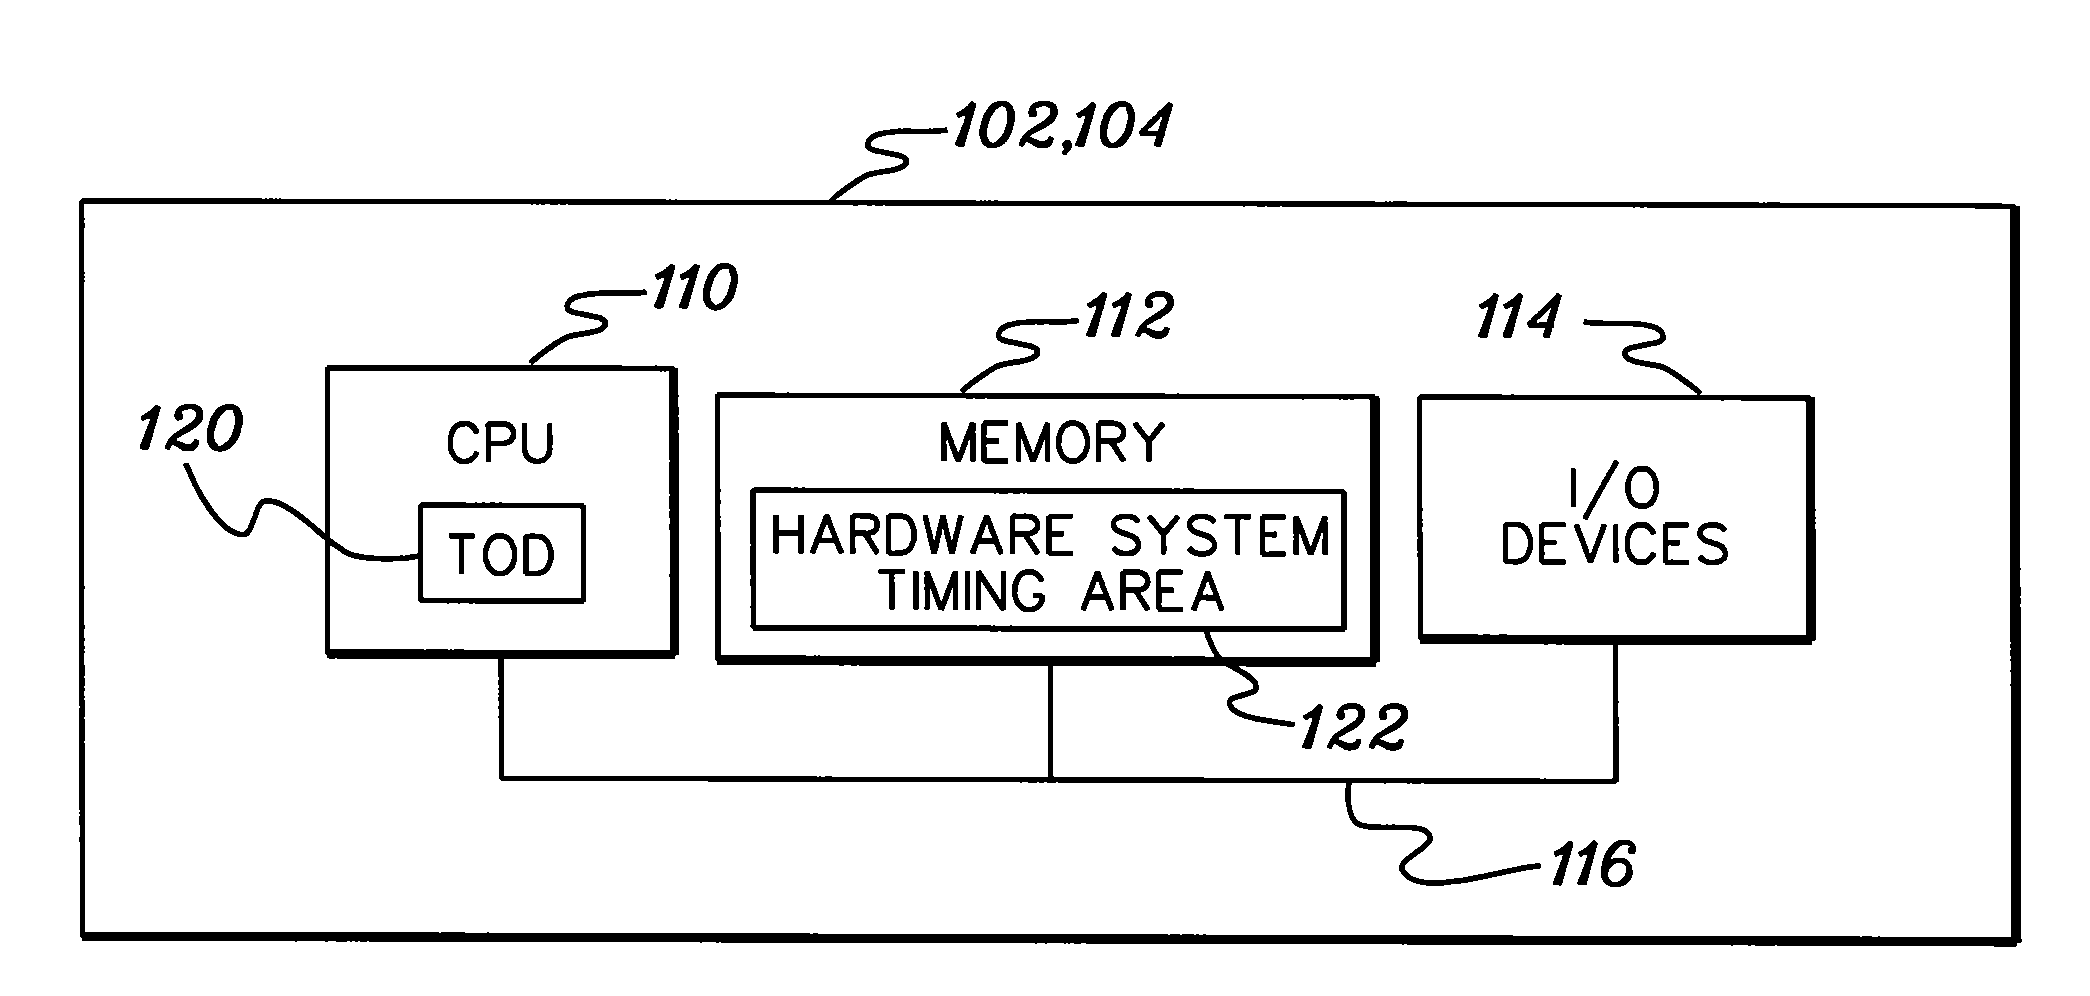 Directly obtaining by application programs information usable in determining clock accuracy